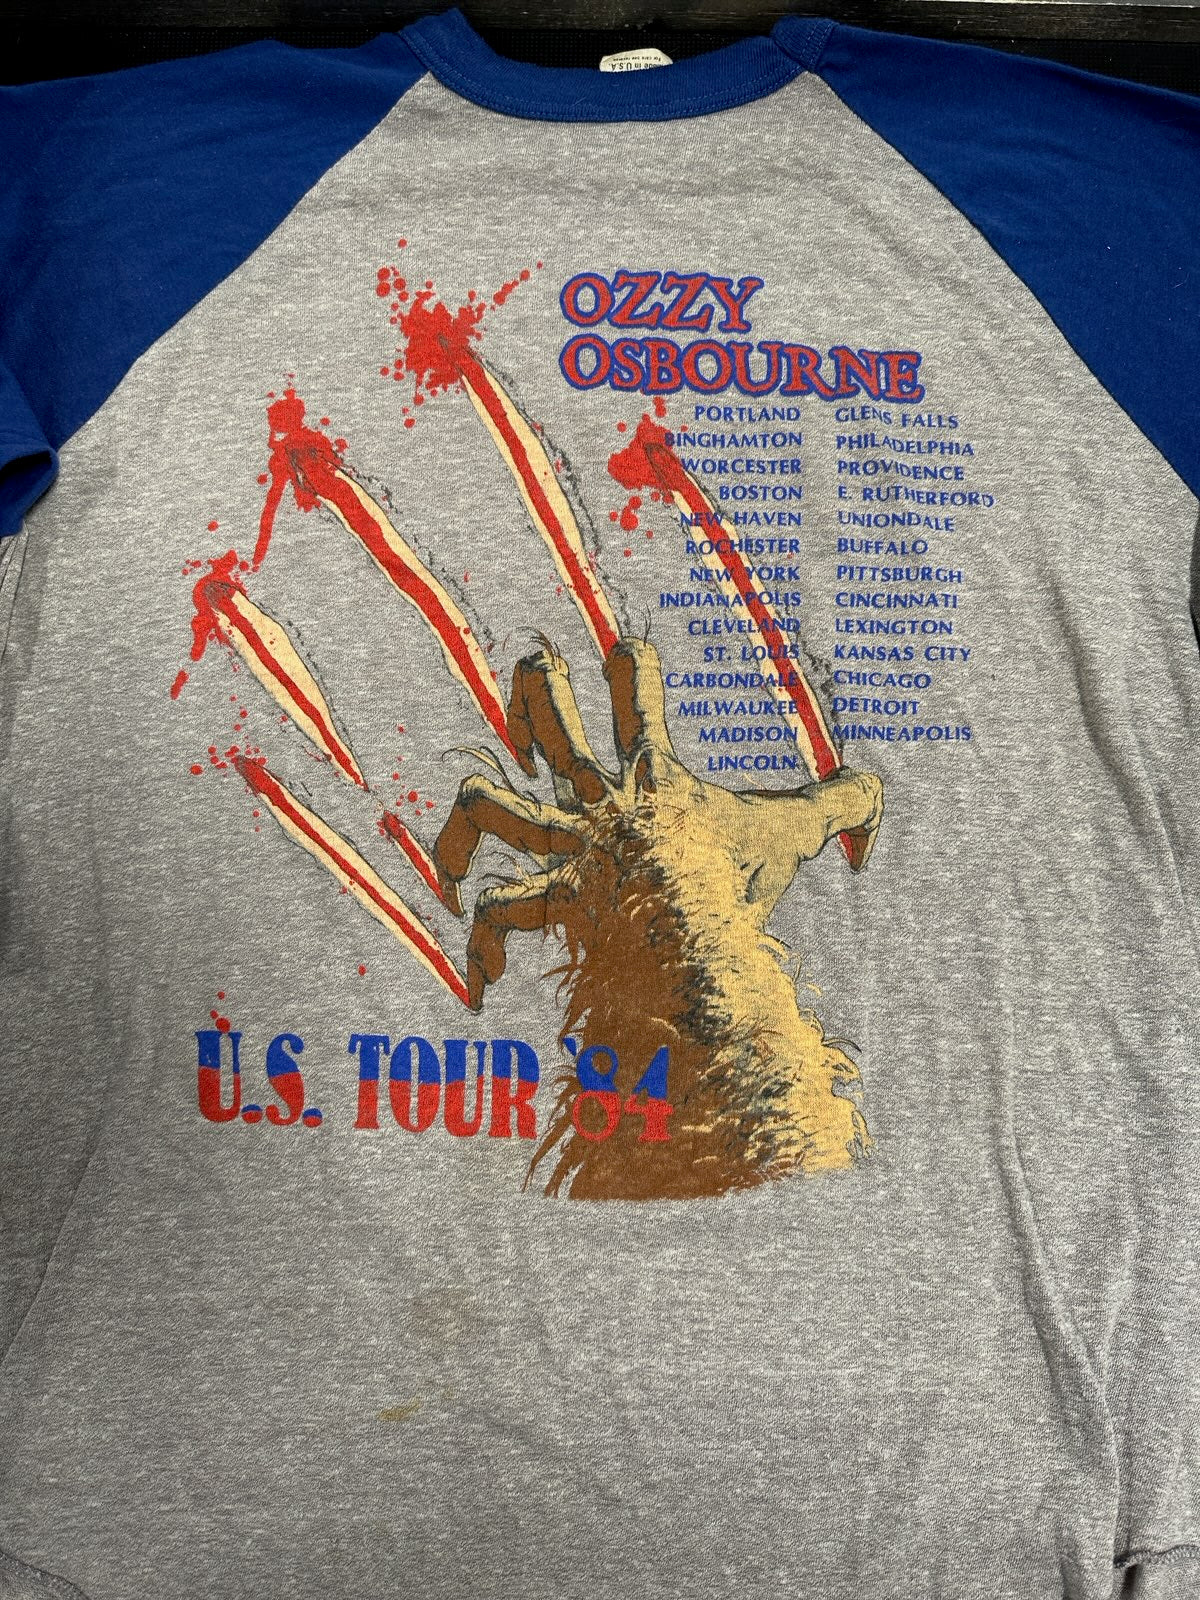 Ozzy Osbourne 1984 Bark At The Moon Tour Raglan/Baseball T-Shirt, Grey w/Blue Arms, Tagged L (27" Top To Bottom, 20" Pit To Pit)